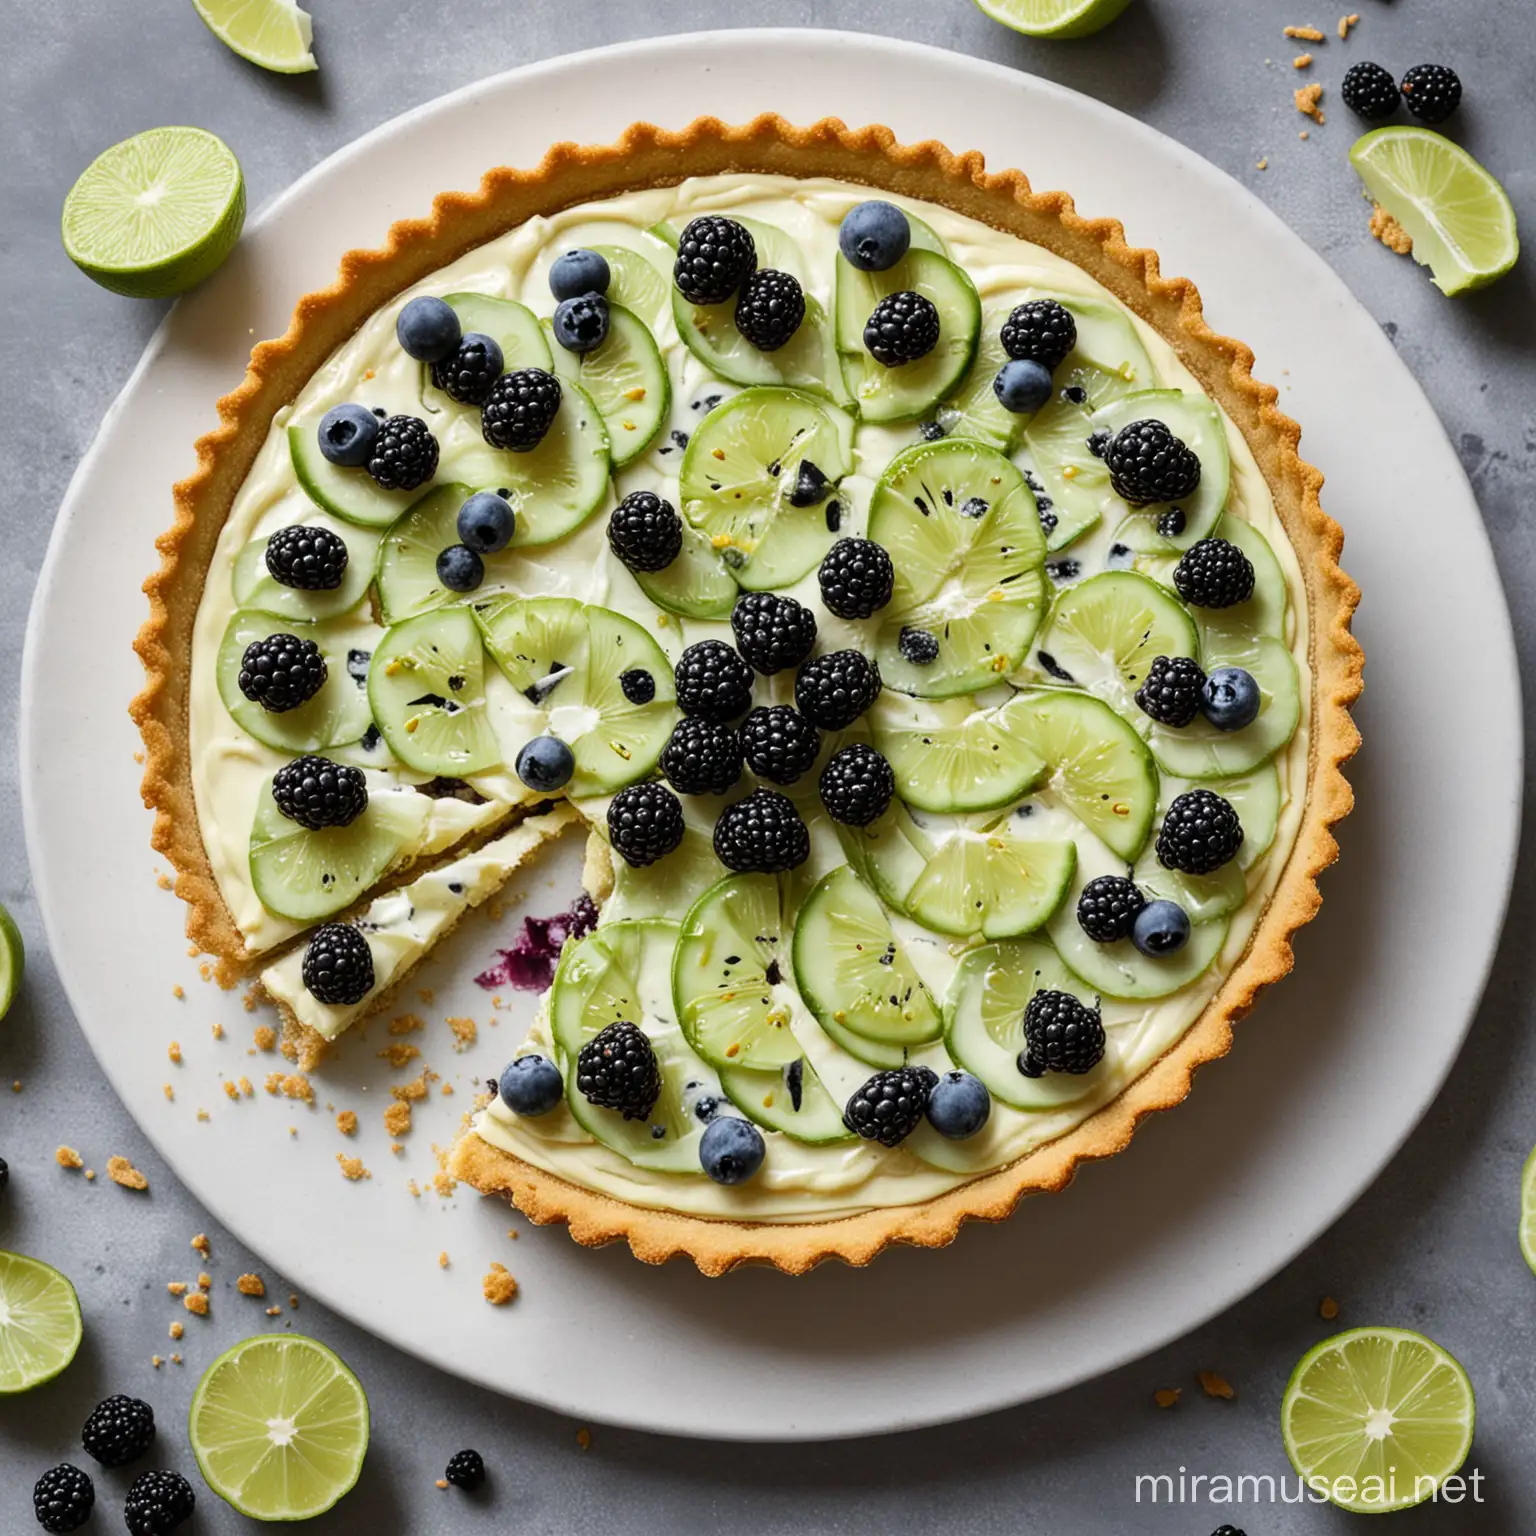 Blue Moon Lime Tart with Fresh Lime Slices and Blackberries